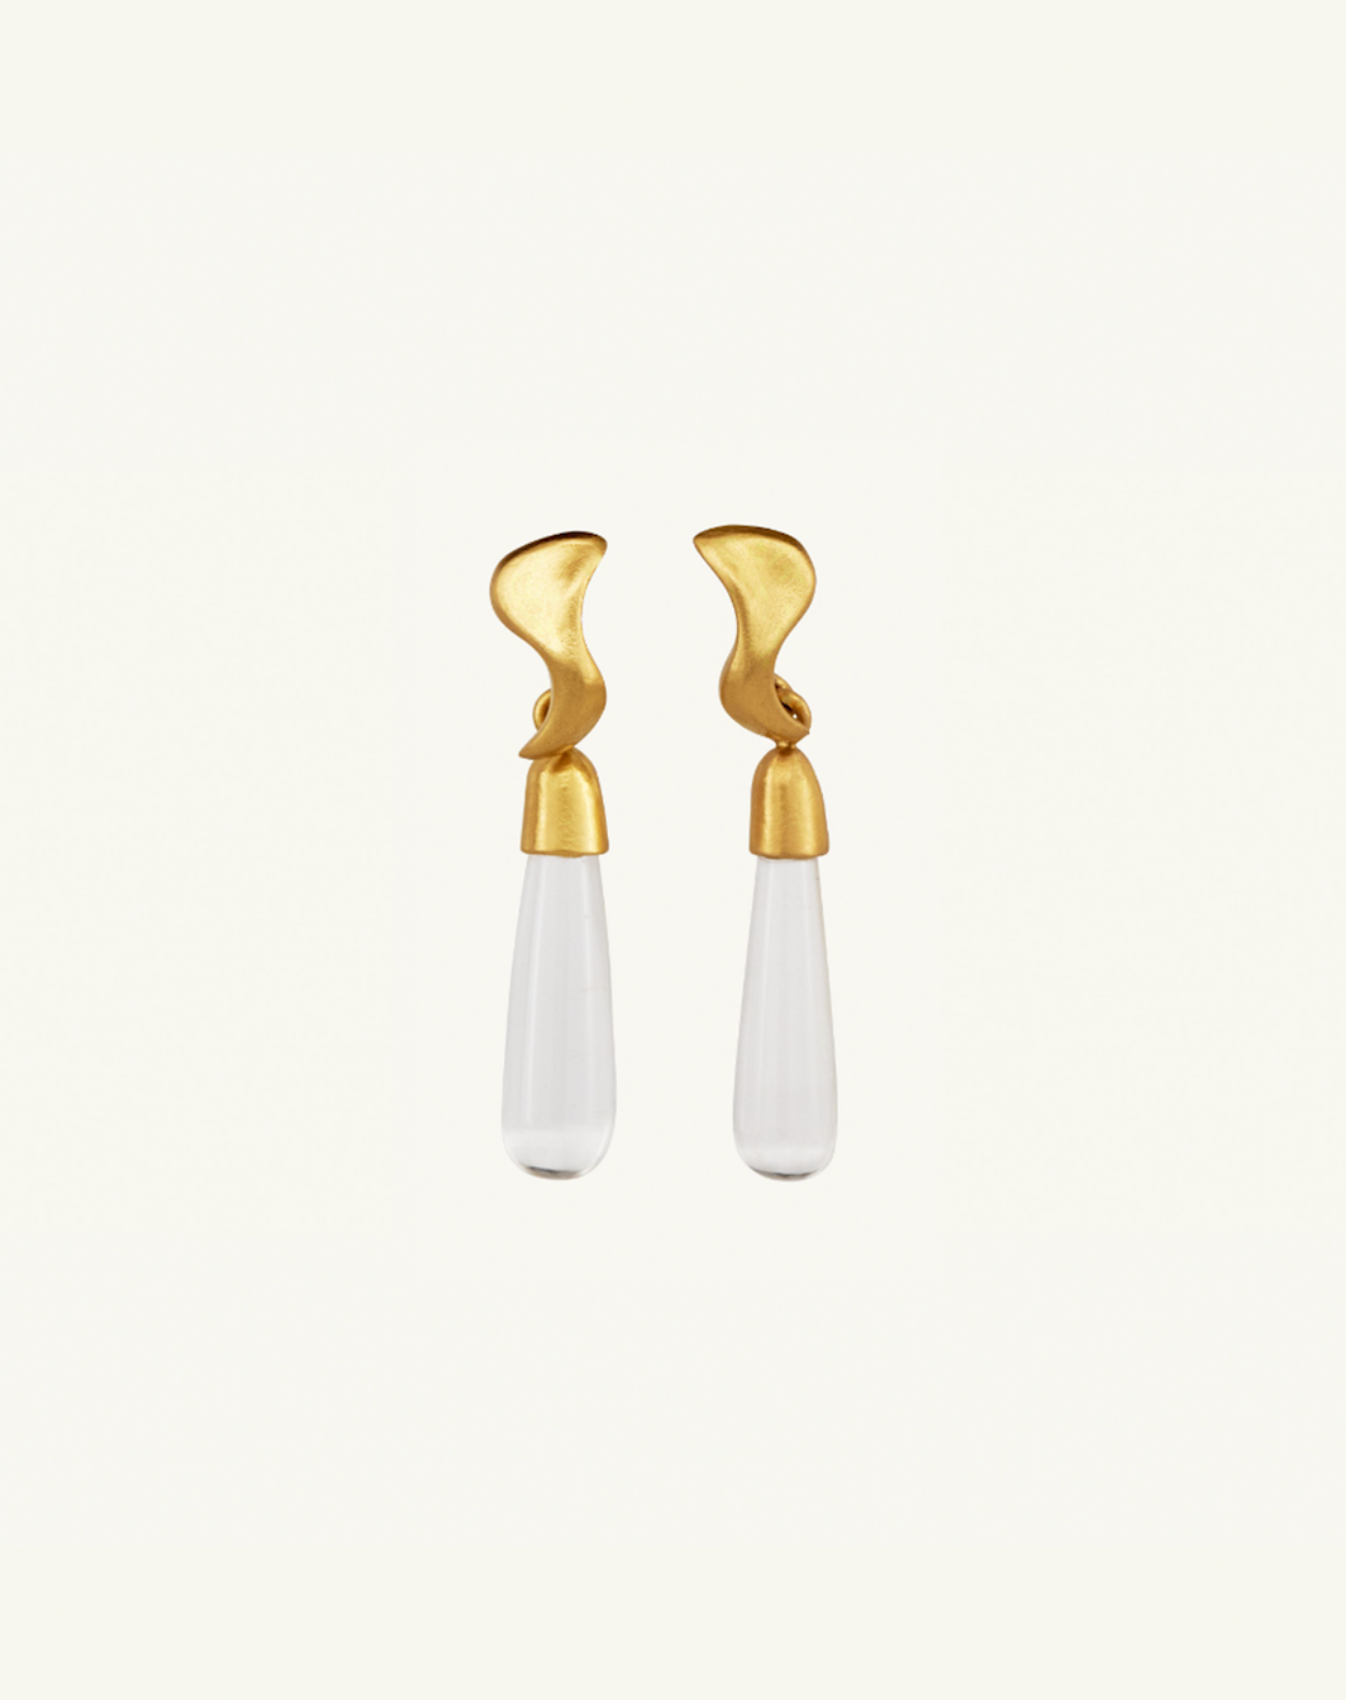 Product image of the i seira sculptural earrings with white moonstone drops